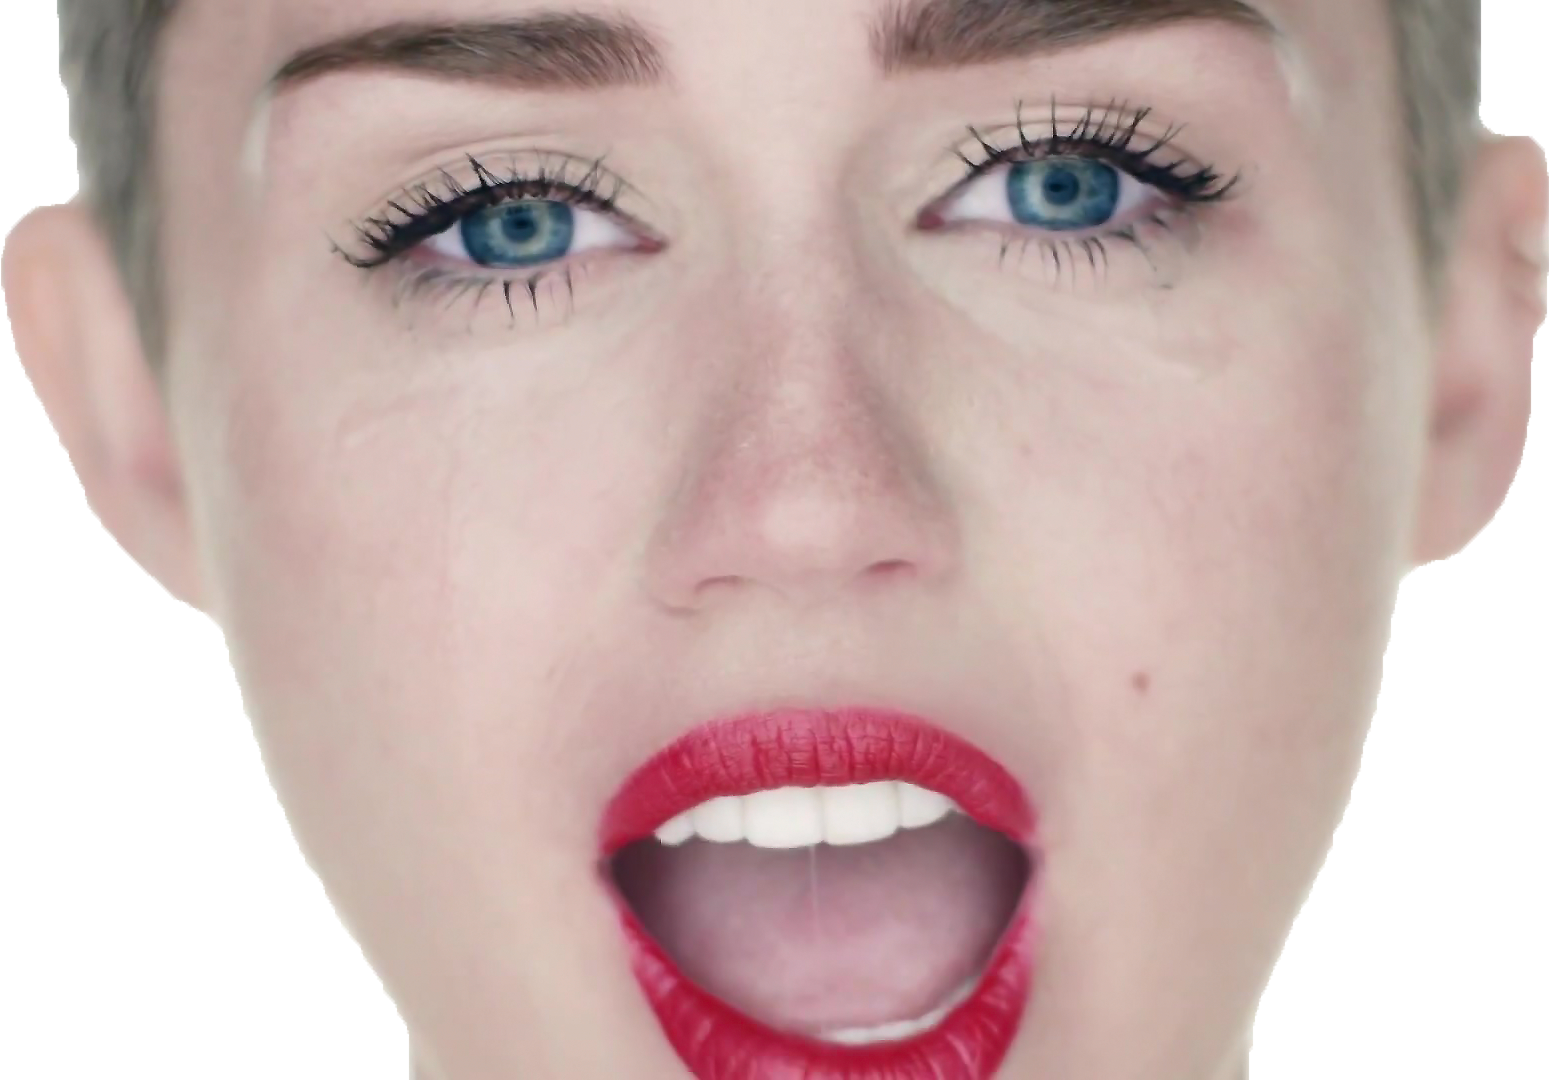 miley cyrus wrecking ball clipart